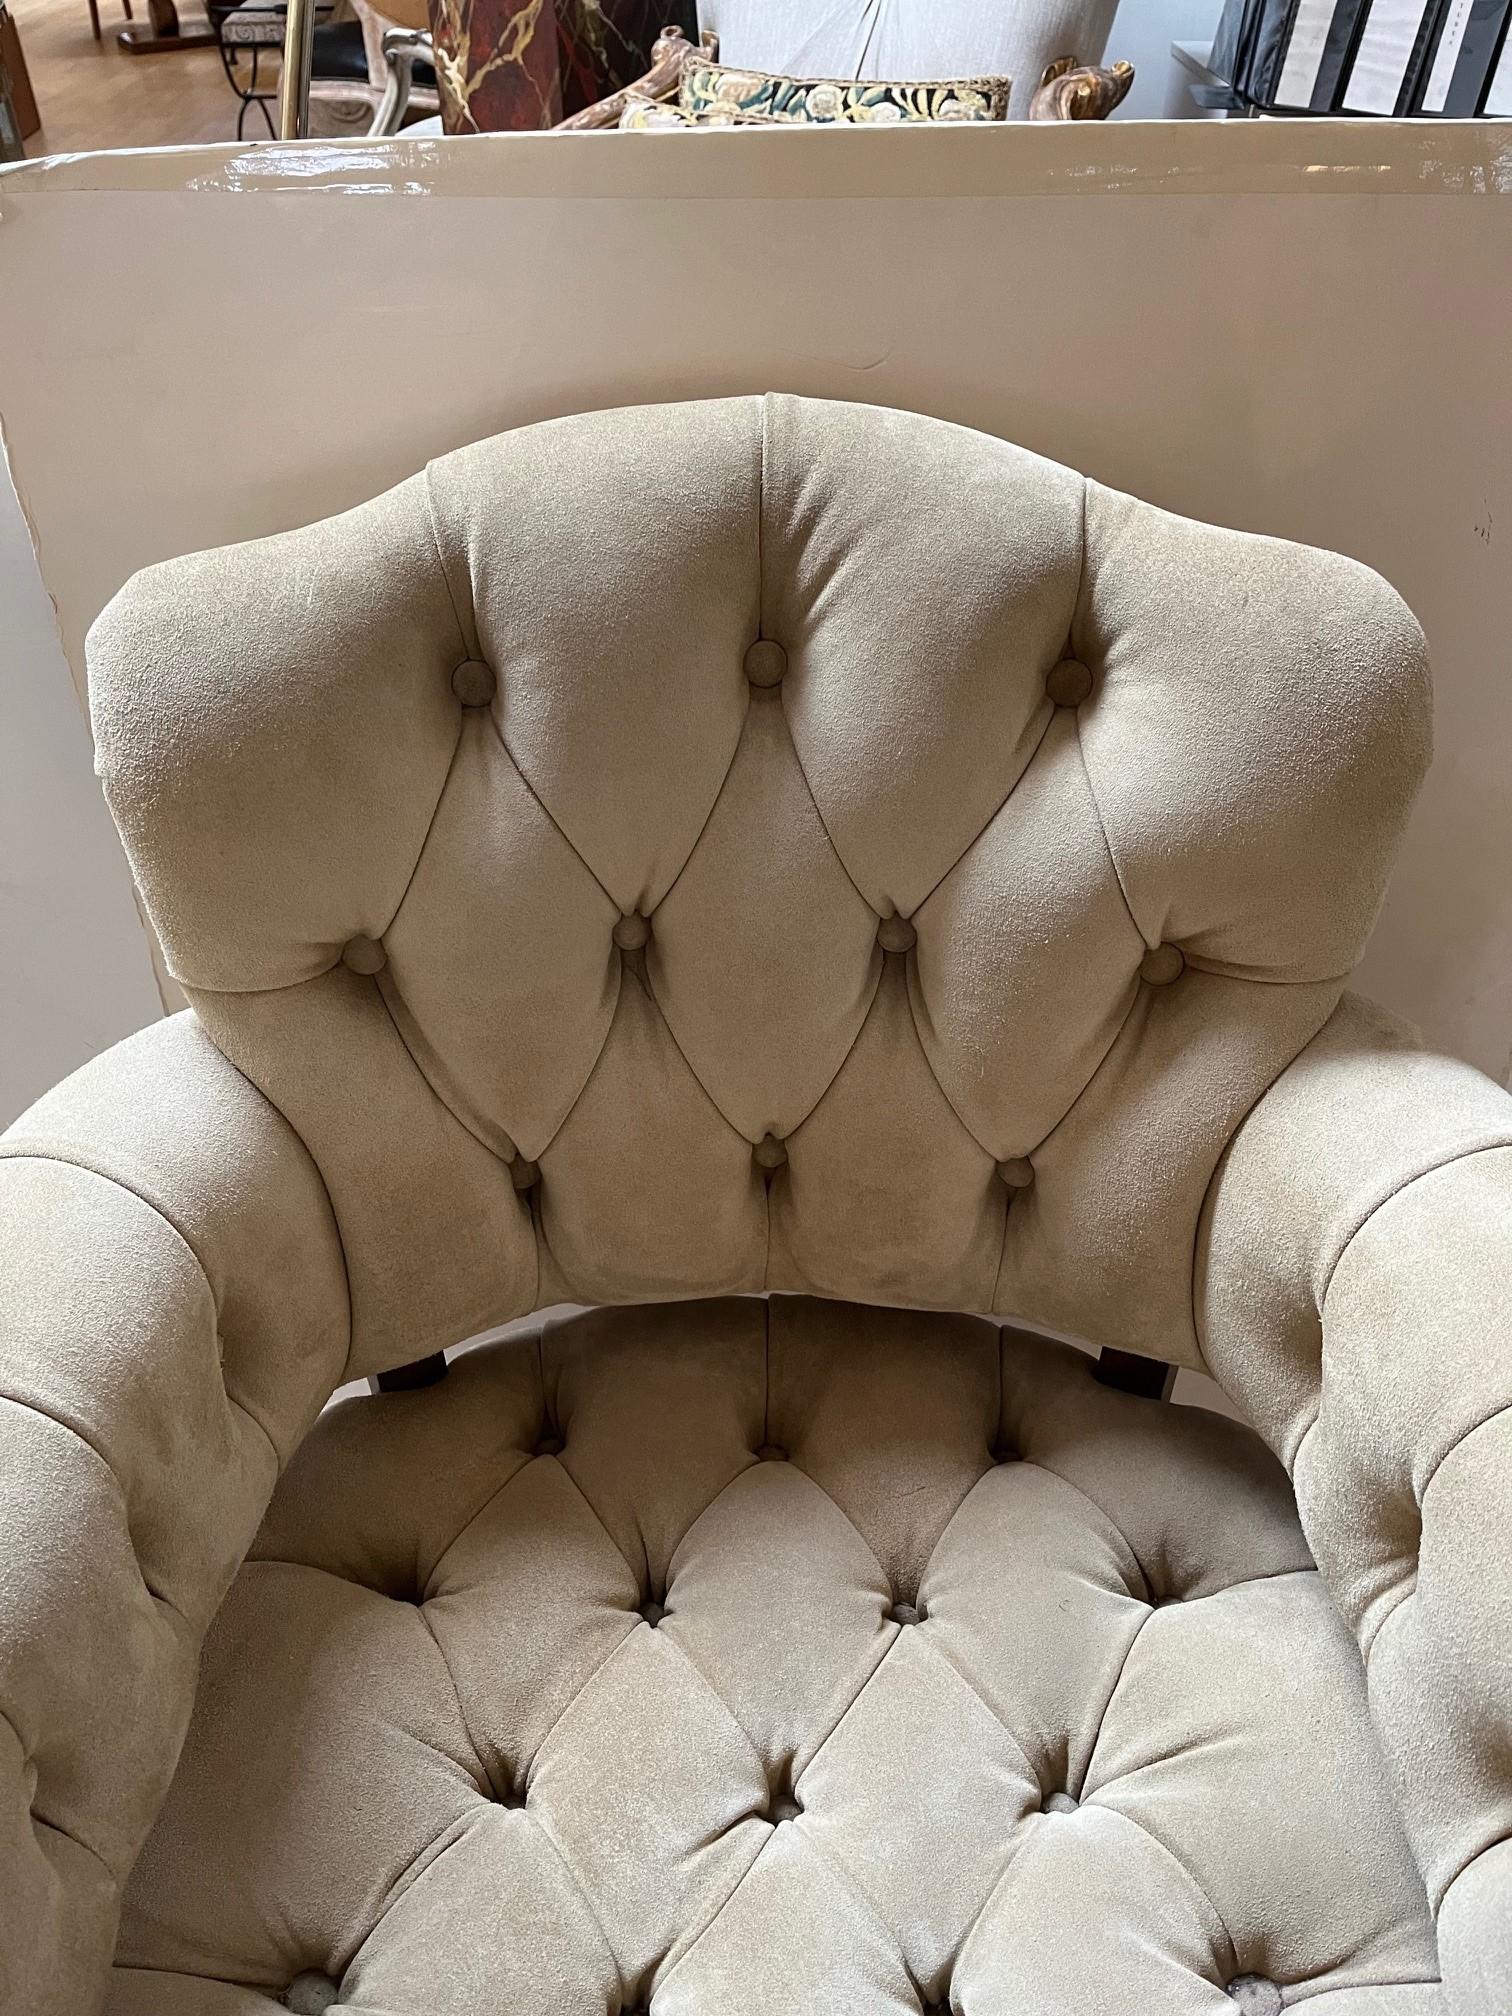 Hand-Carved Made to Order Elegant Tufted Seat and Back in Beige Suede Leather Seville Chair For Sale